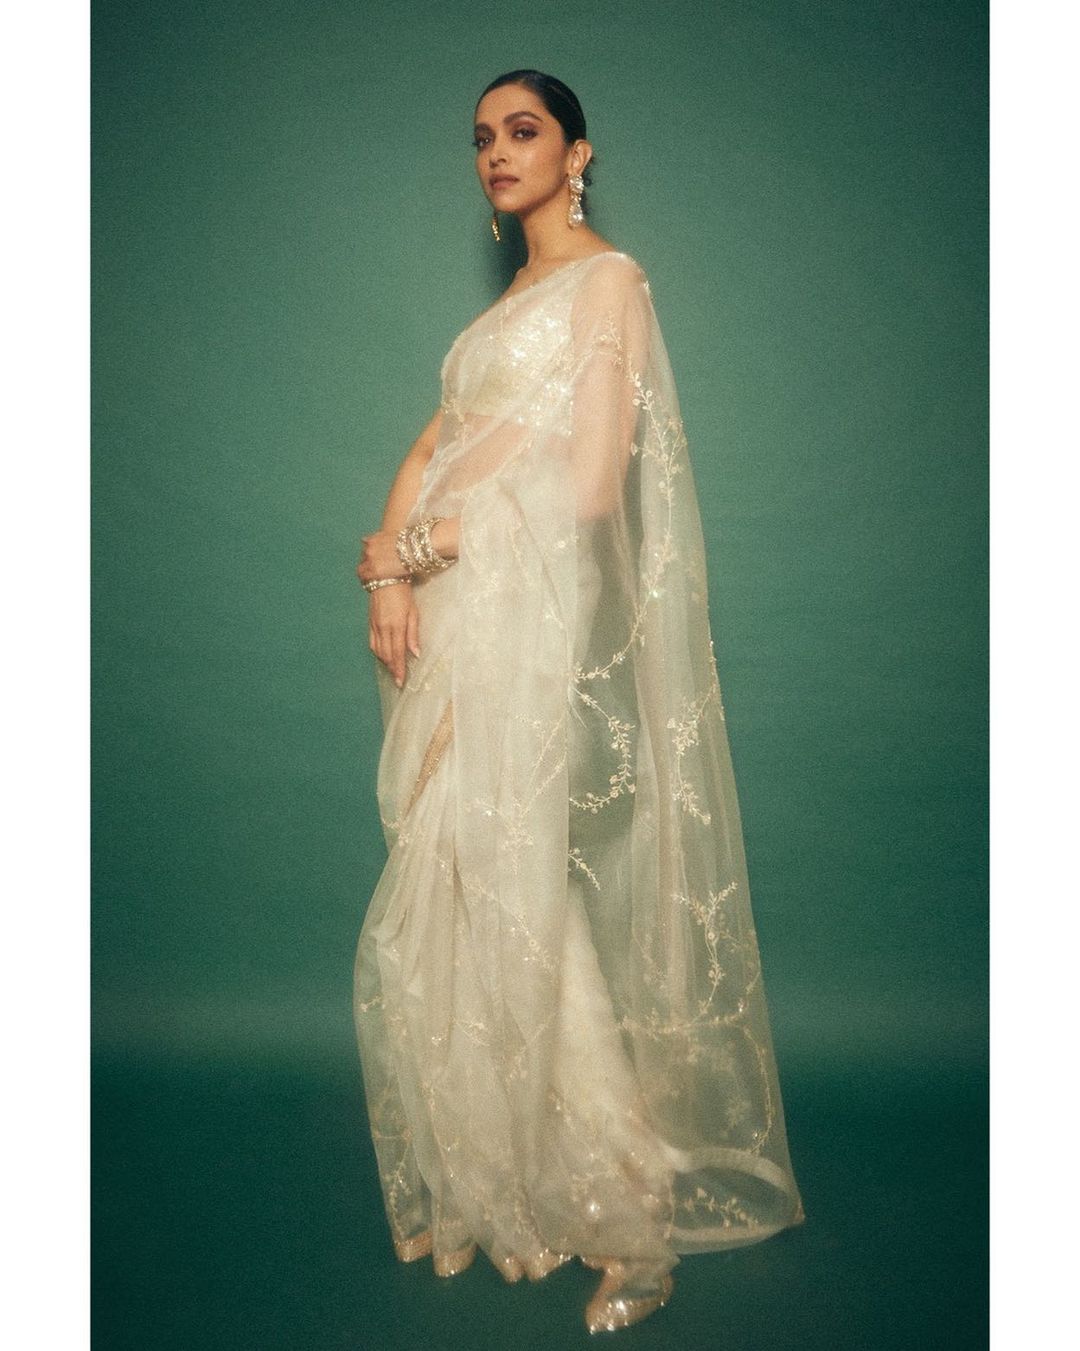 Deepika Padukone in the sheer white embroidered saree in a vision to behold.